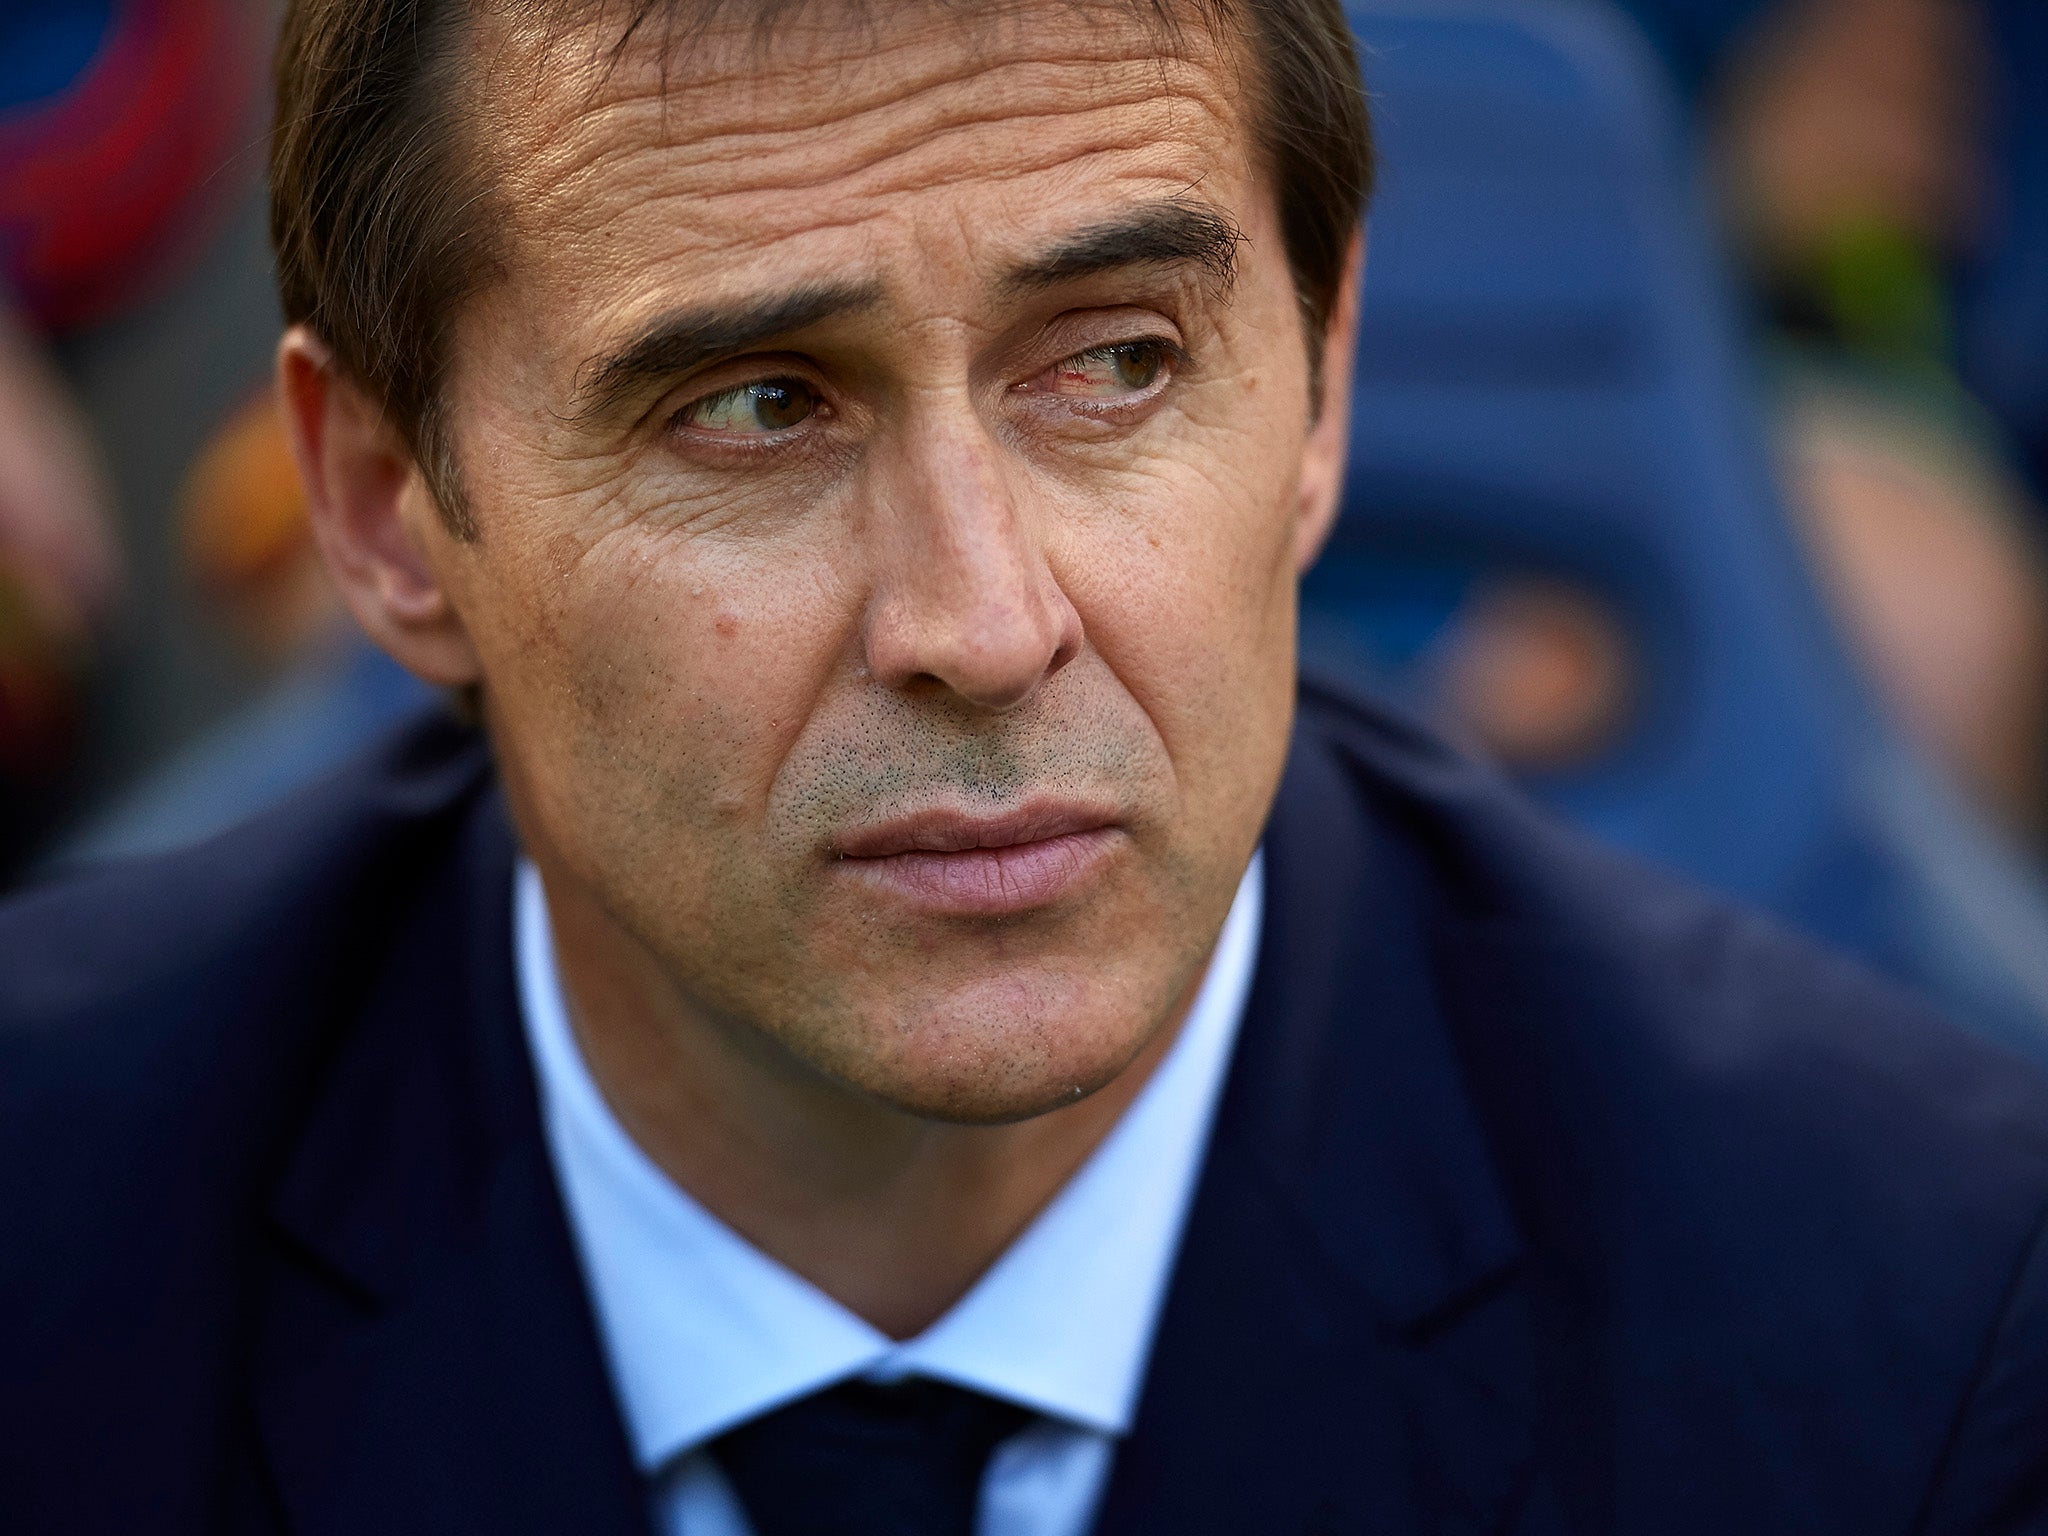 Julen Lopetegui was unexpectedly confirmed as Real Madrid's new manager on Tuesday